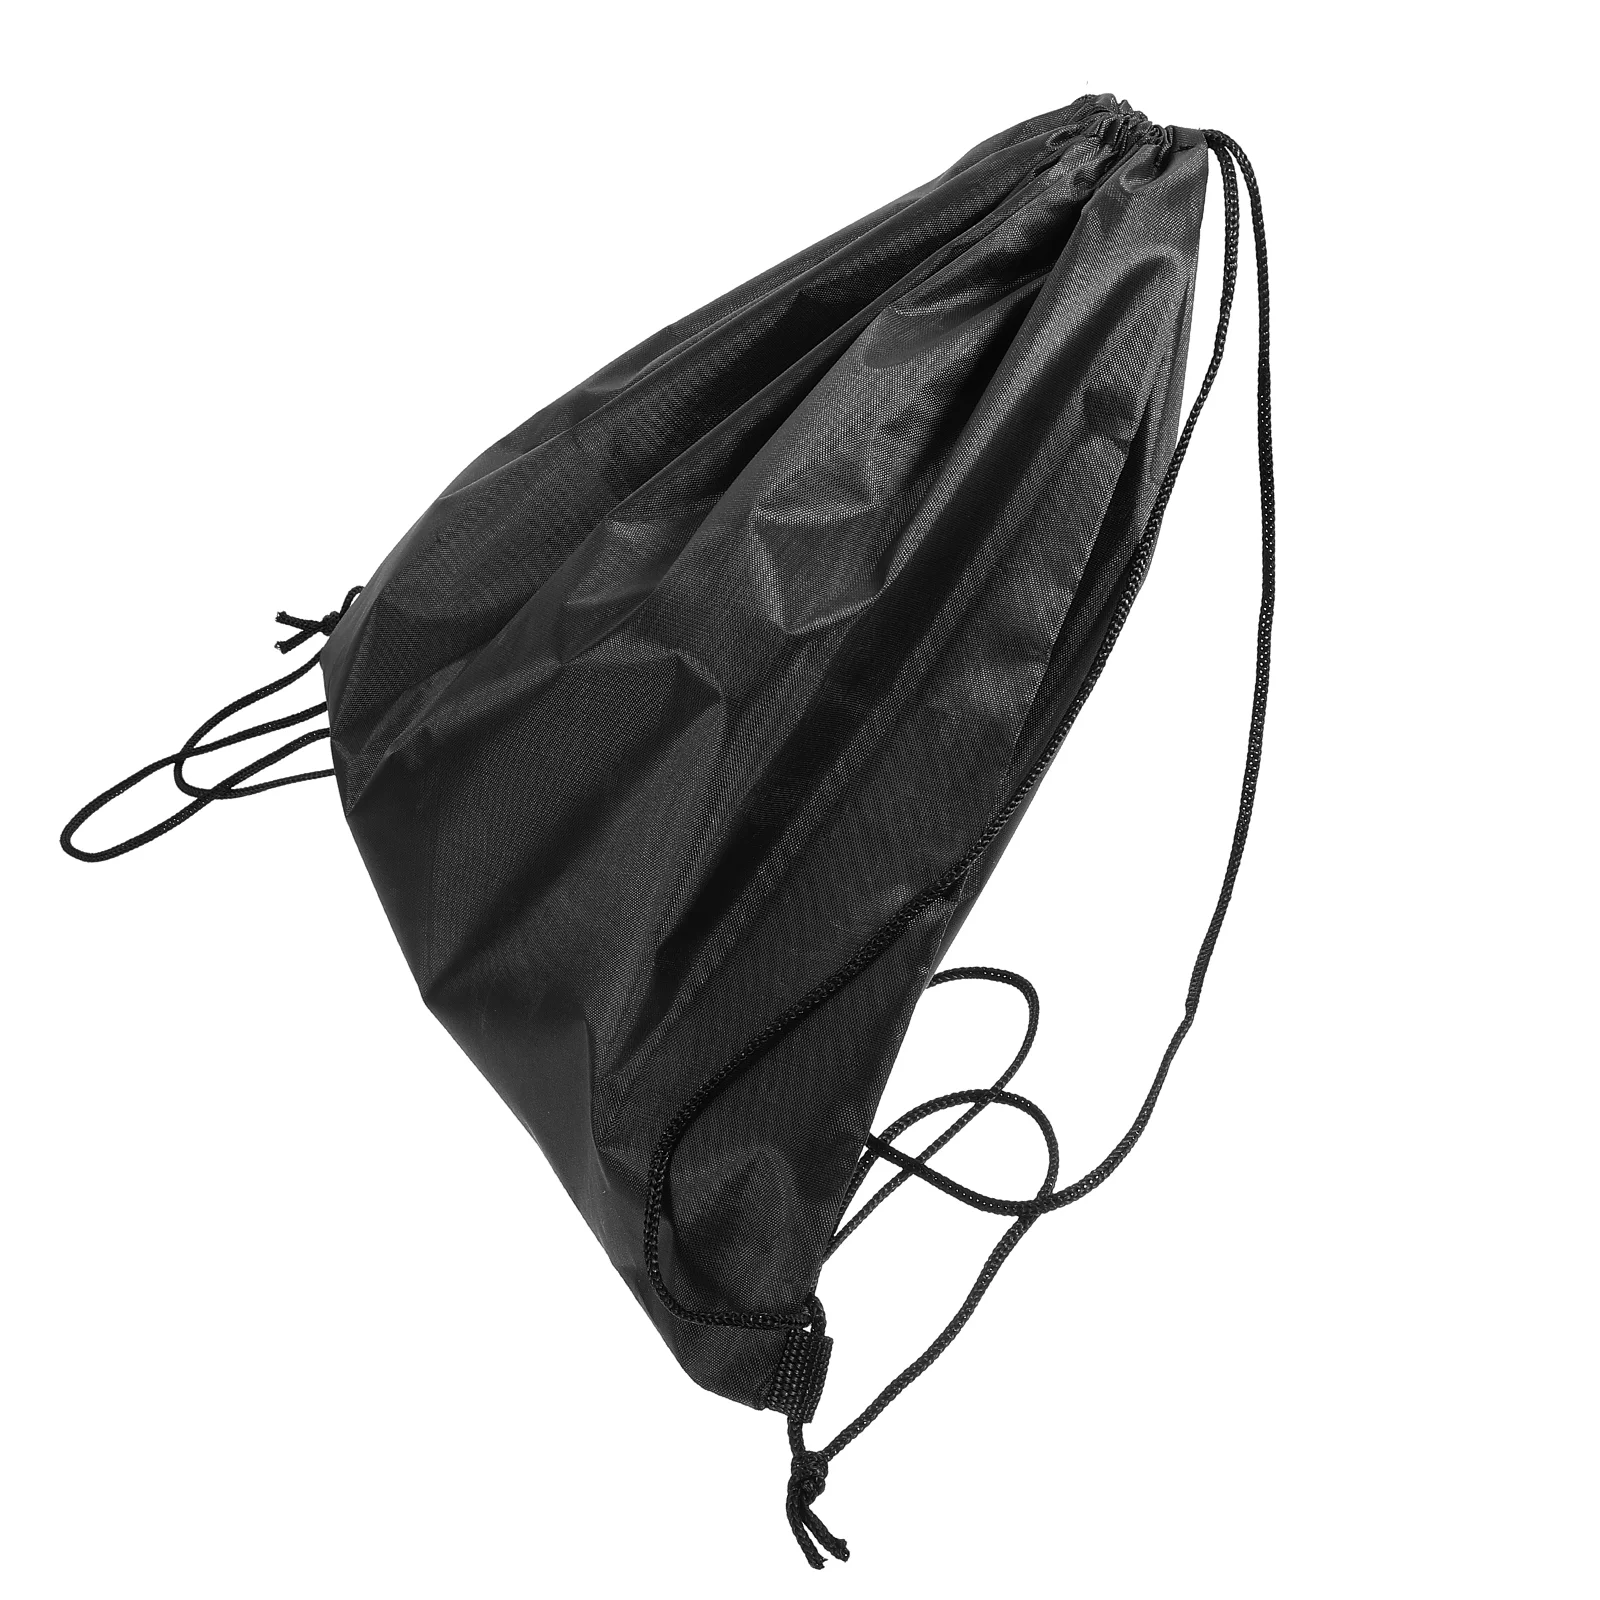 Portable Bag Drawstring Pouch Outdoor Motorcycle Storage Bag